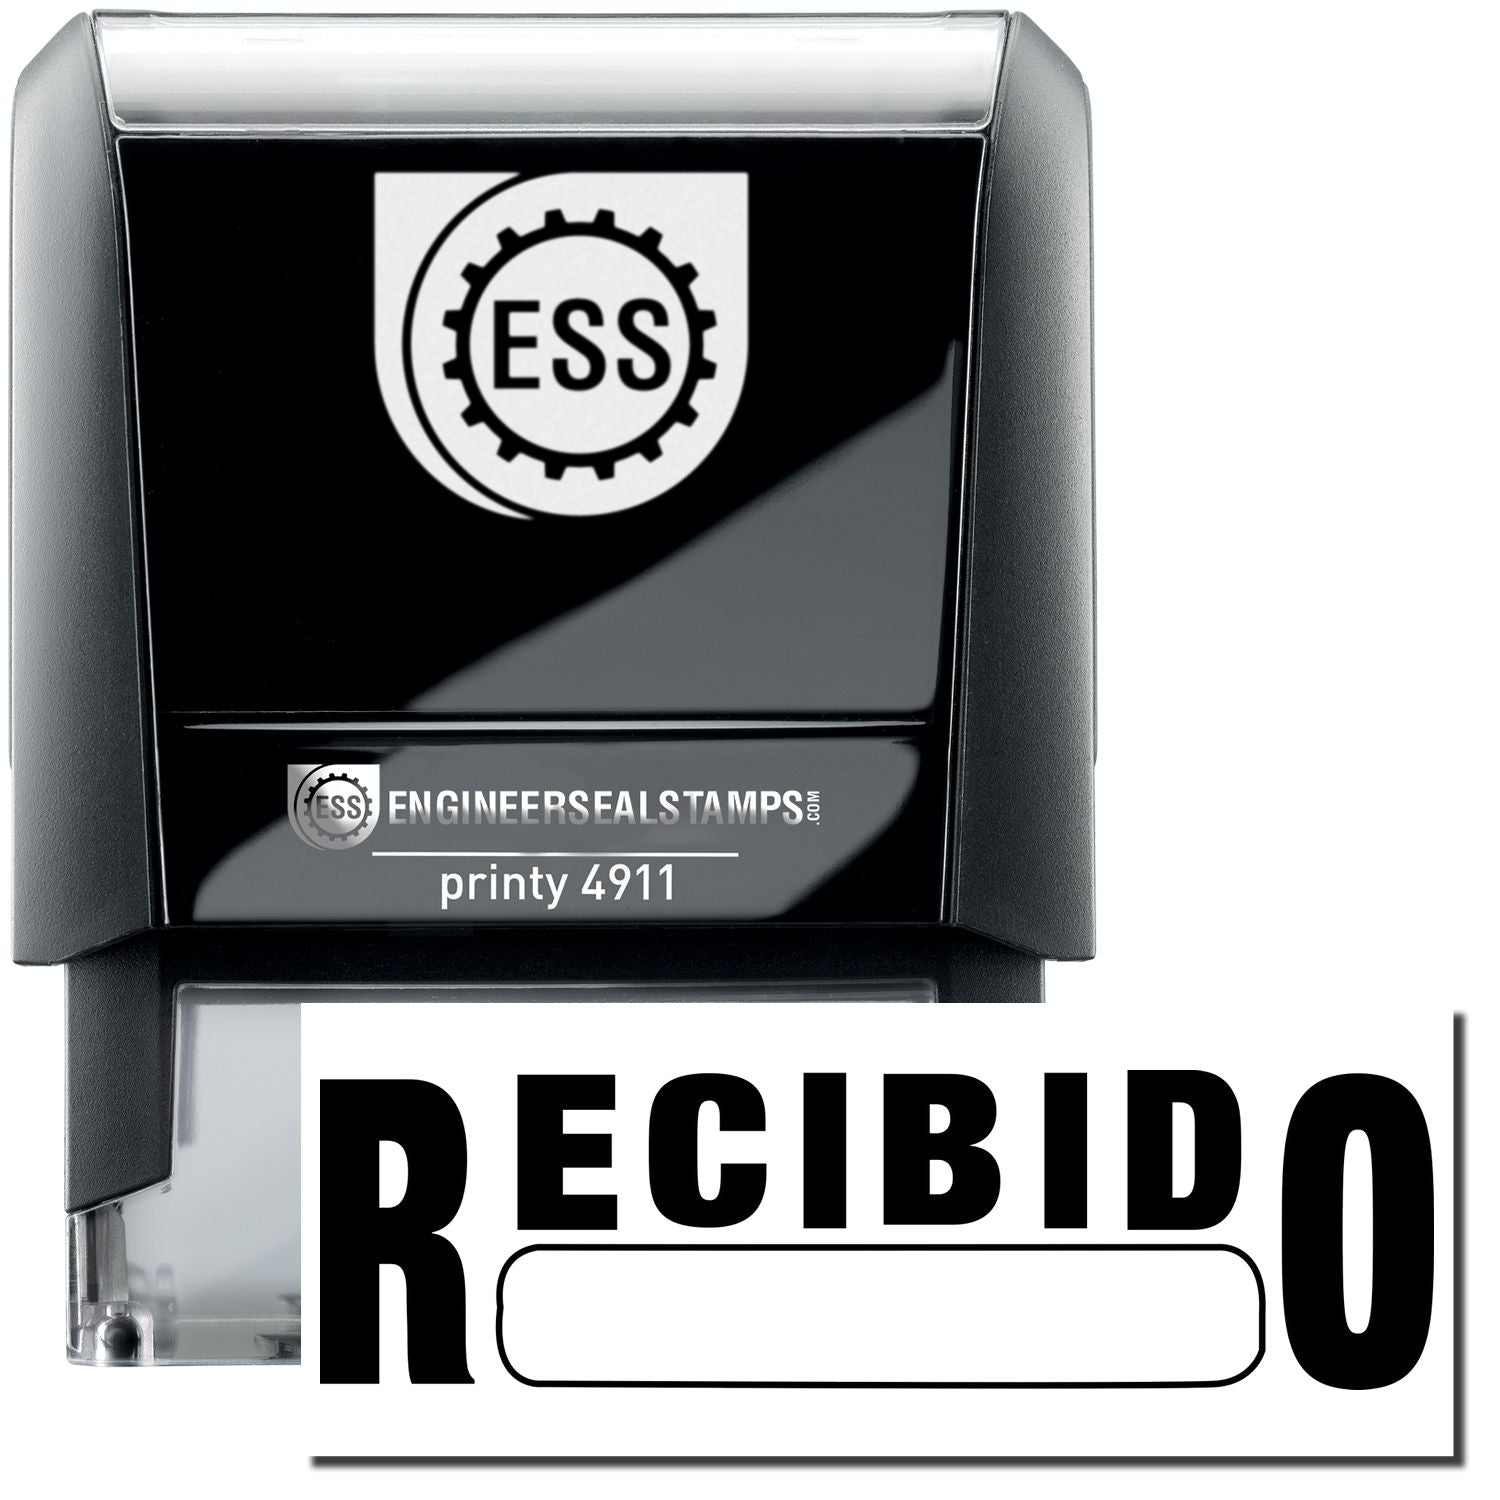 A self-inking stamp with a stamped image showing how the text "RECIBIDO" with a box under it is displayed after stamping.